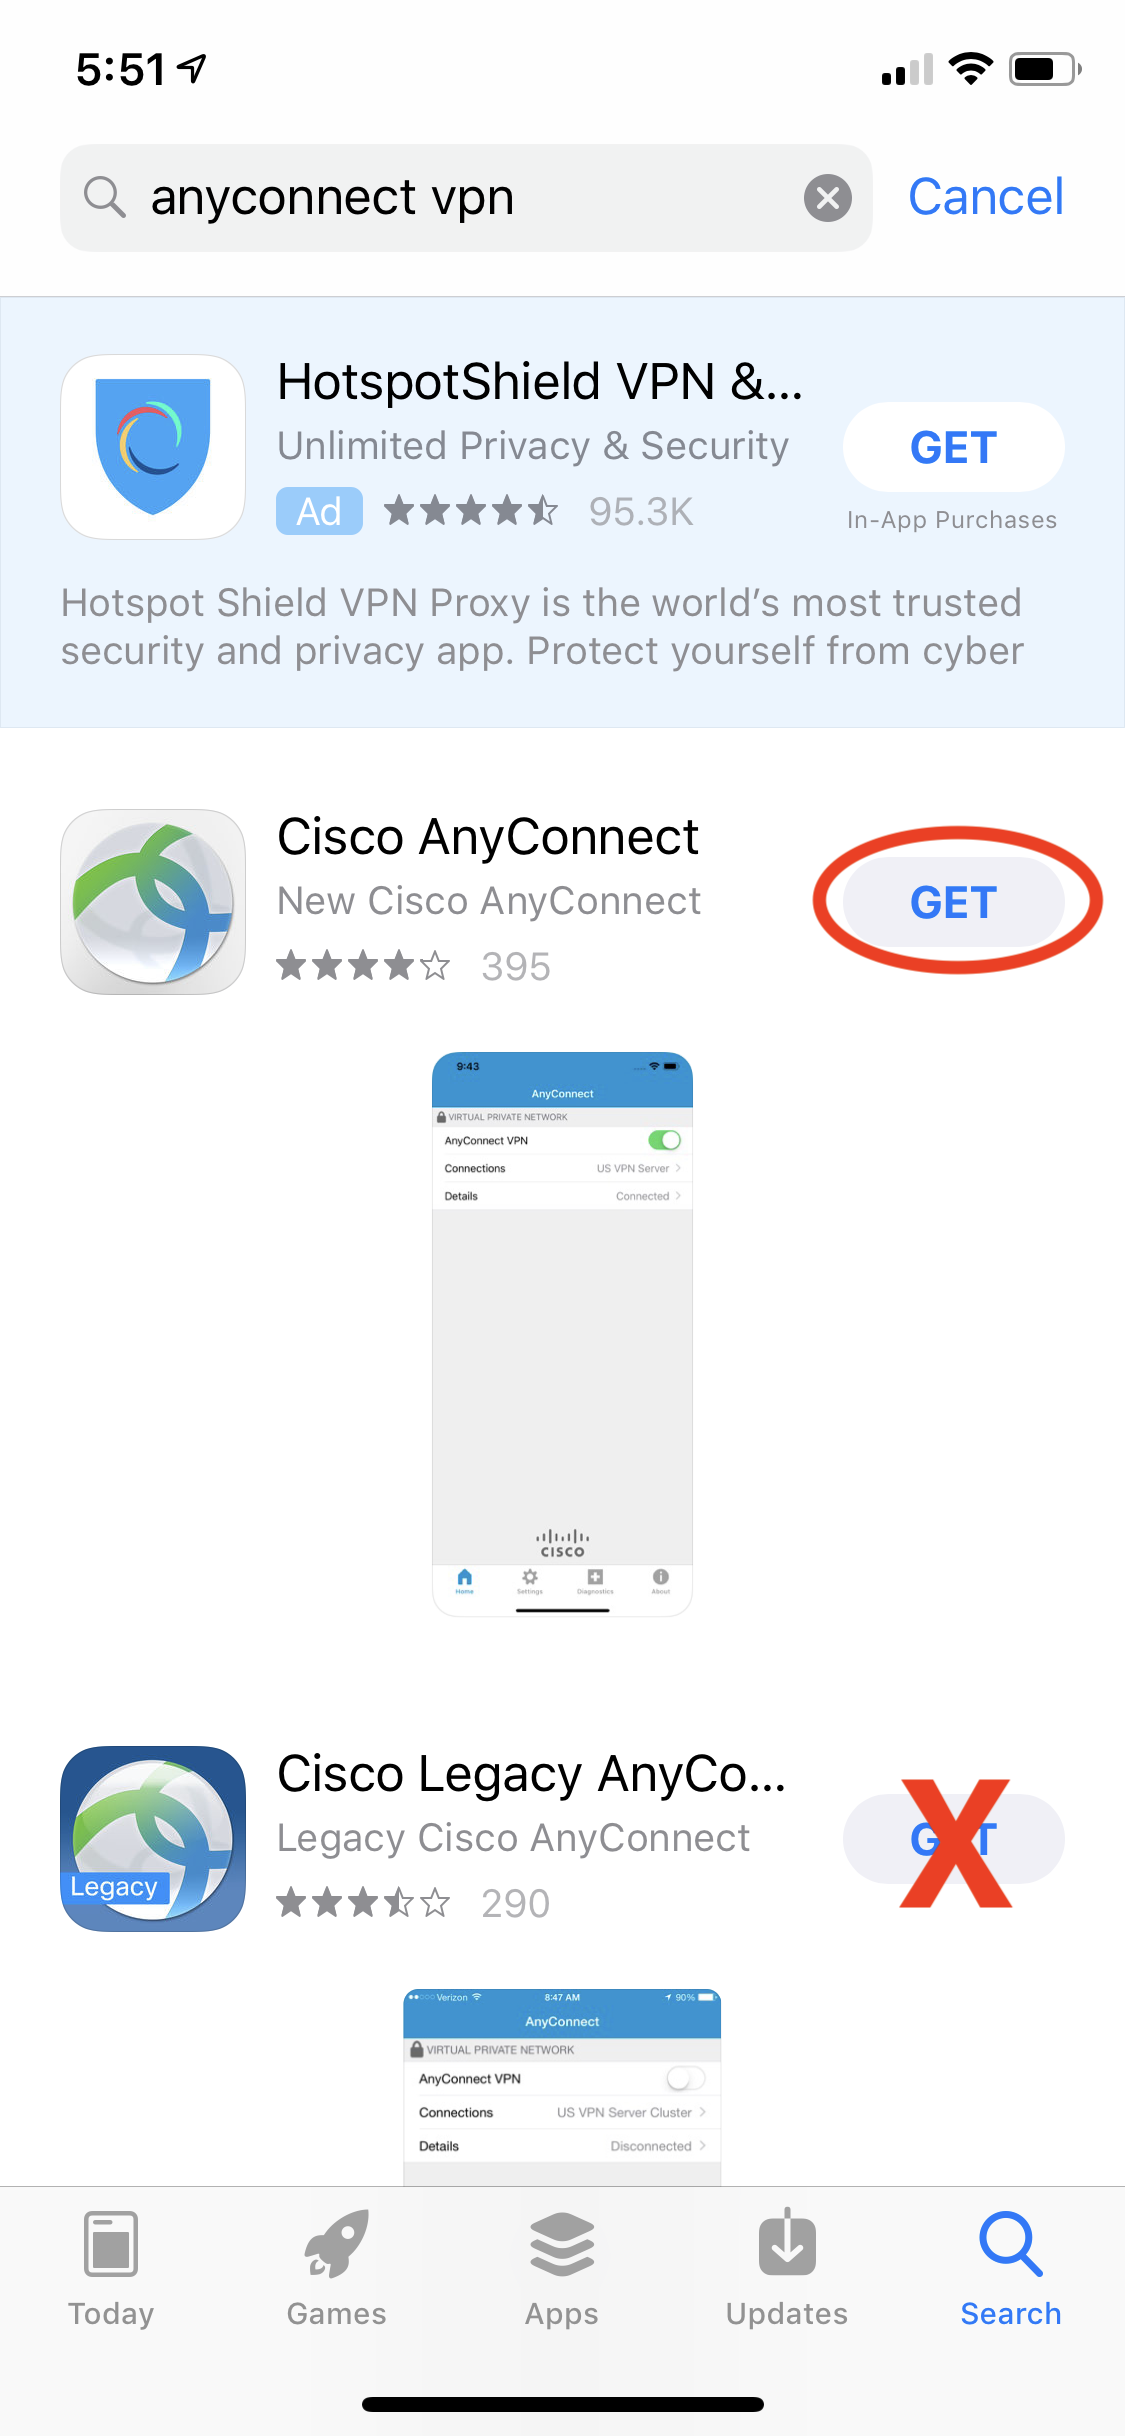 anyconnect for cisco vpn phone